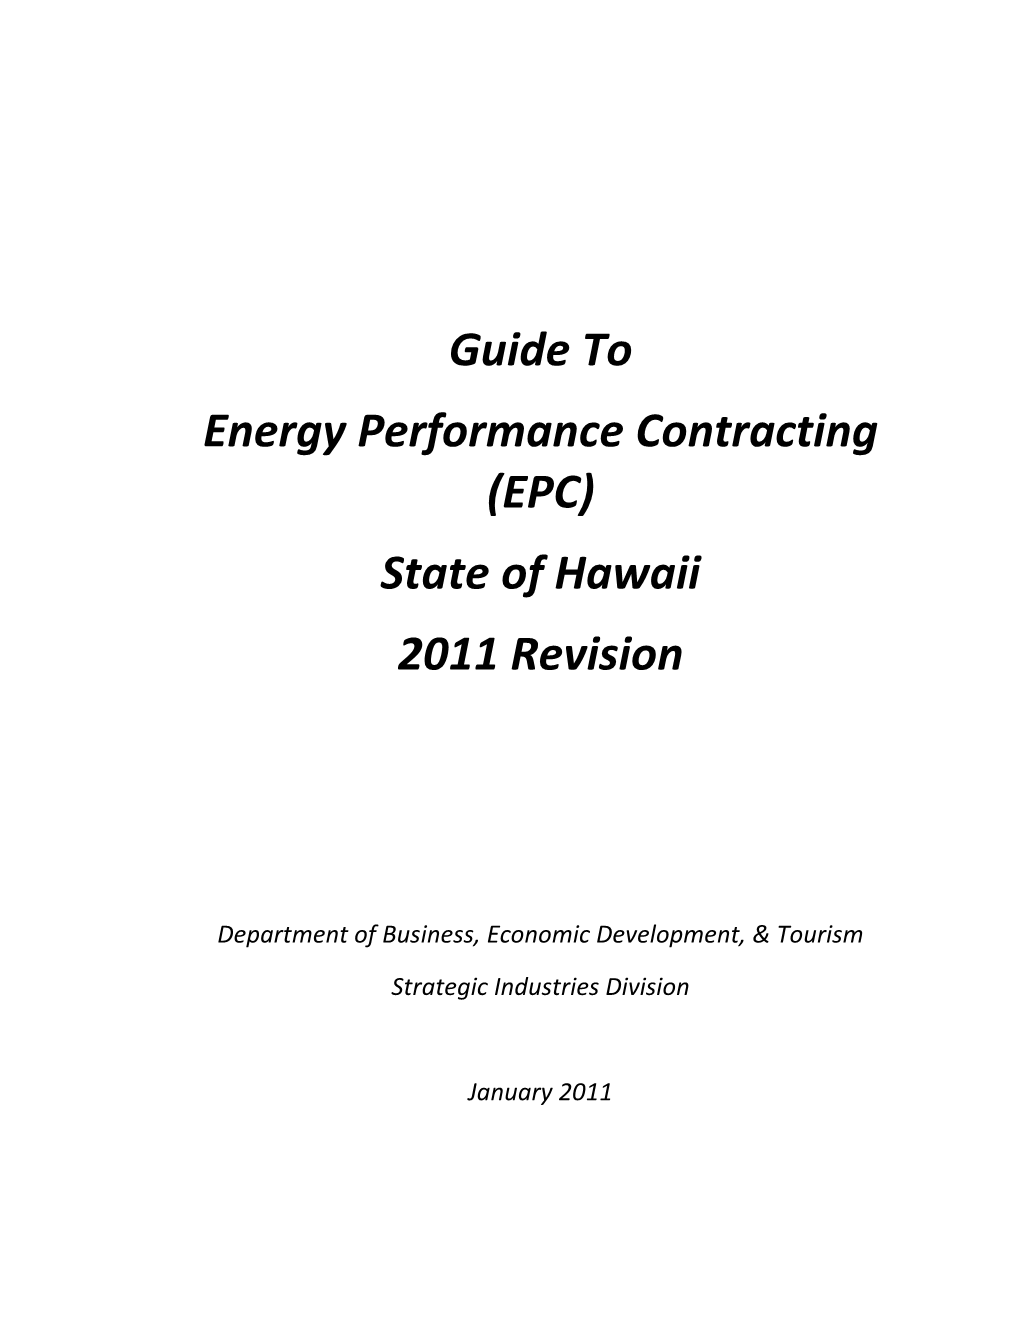 Guide to Energy Performance Contracting (EPC) State of Hawaii 2011 Revision